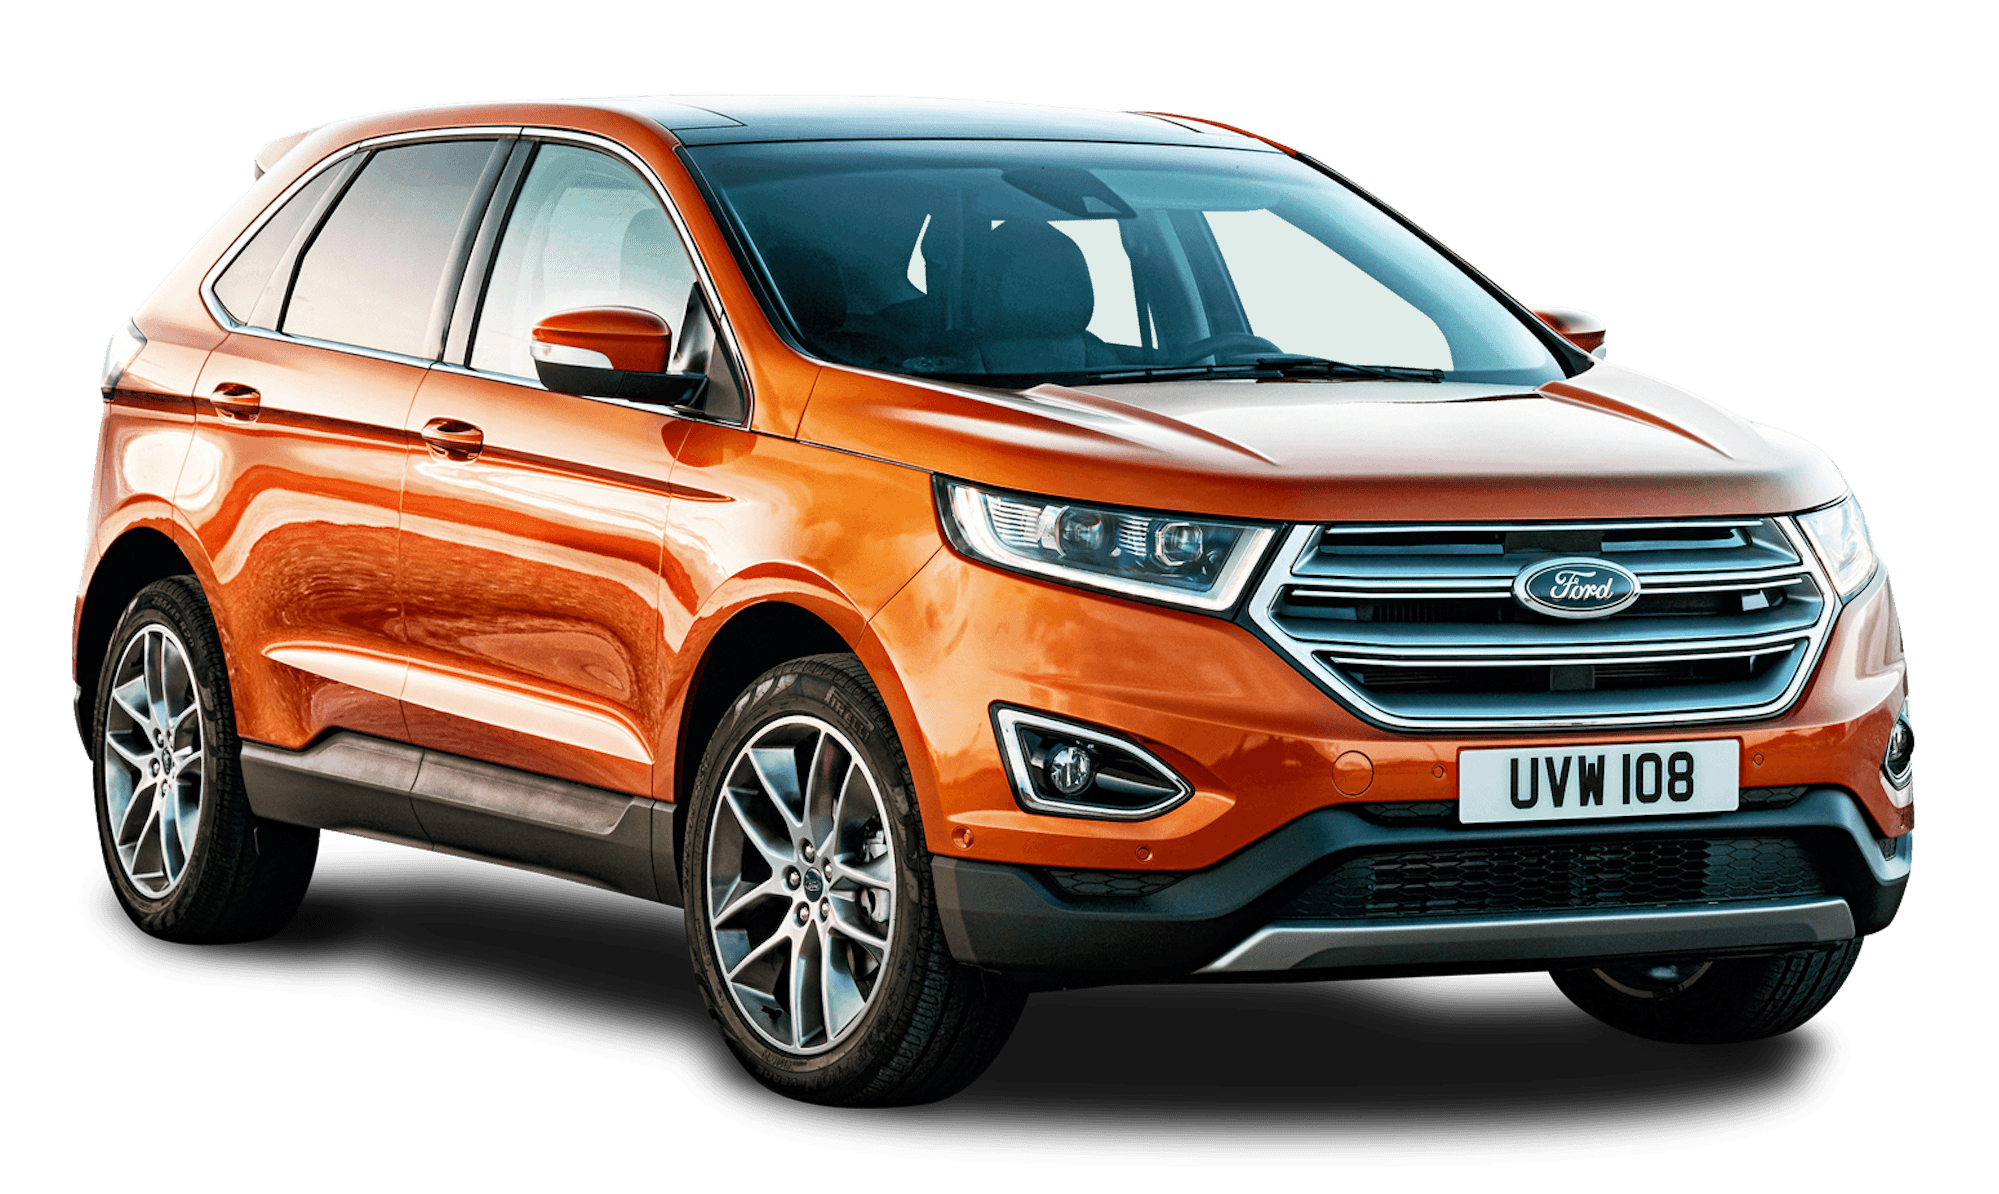 Find your best Ford finance rate with Driva